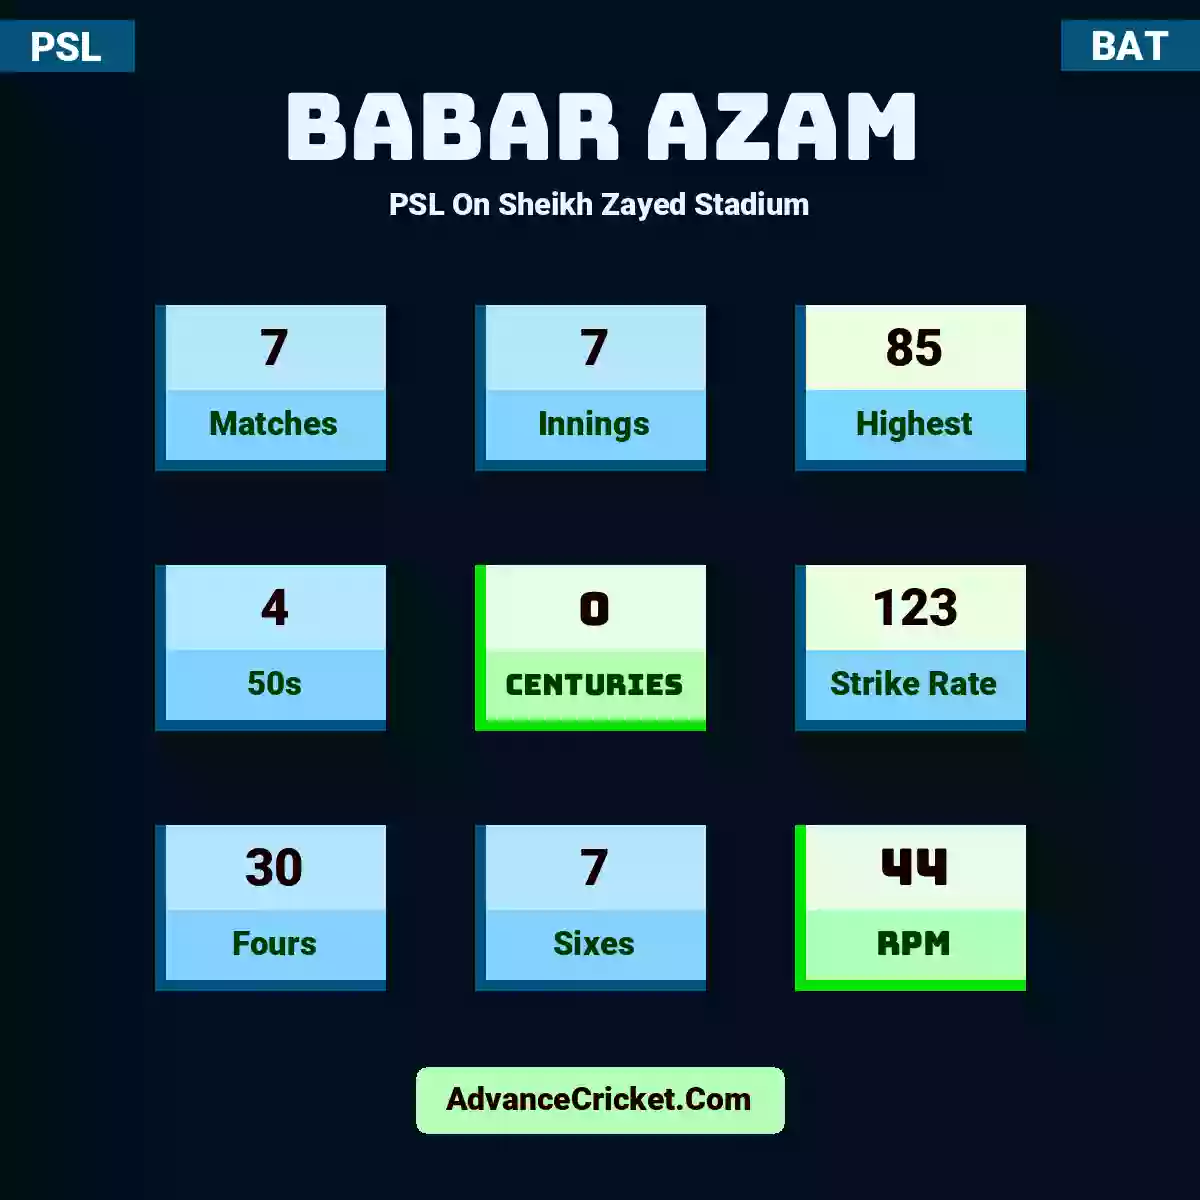 Babar Azam PSL  On Sheikh Zayed Stadium, Babar Azam played 7 matches, scored 85 runs as highest, 4 half-centuries, and 0 centuries, with a strike rate of 123. B.Azam hit 30 fours and 7 sixes, with an RPM of 44.